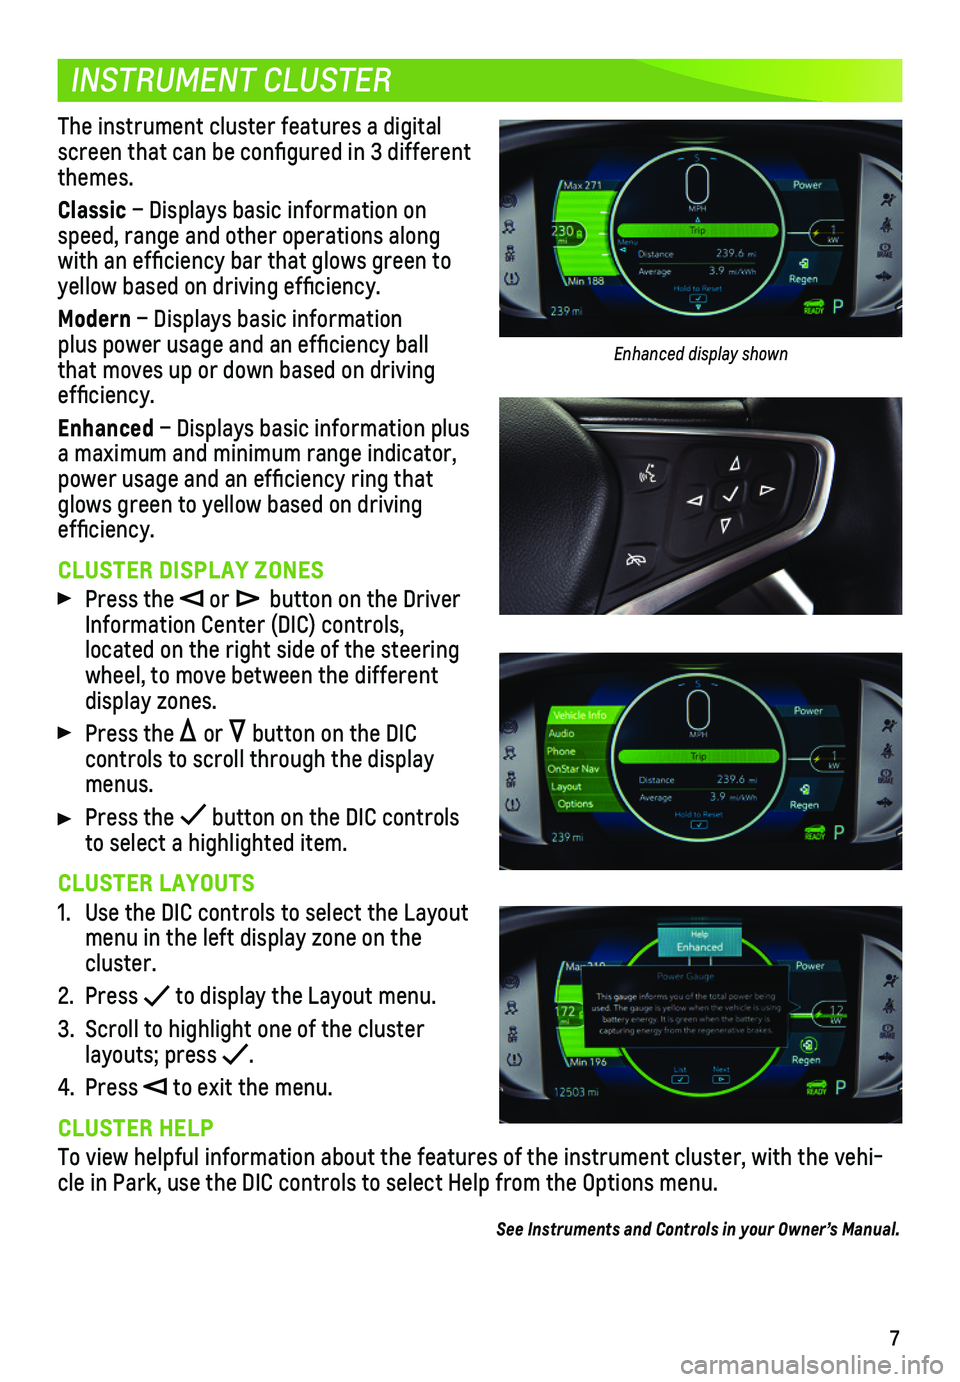 CHEVROLET BOLT EV 2021  Get To Know Guide 7
INSTRUMENT CLUSTER
The instrument cluster features a digital screen that can be configured in 3 different themes.
Classic – Displays basic information on speed, range and other operations along wi